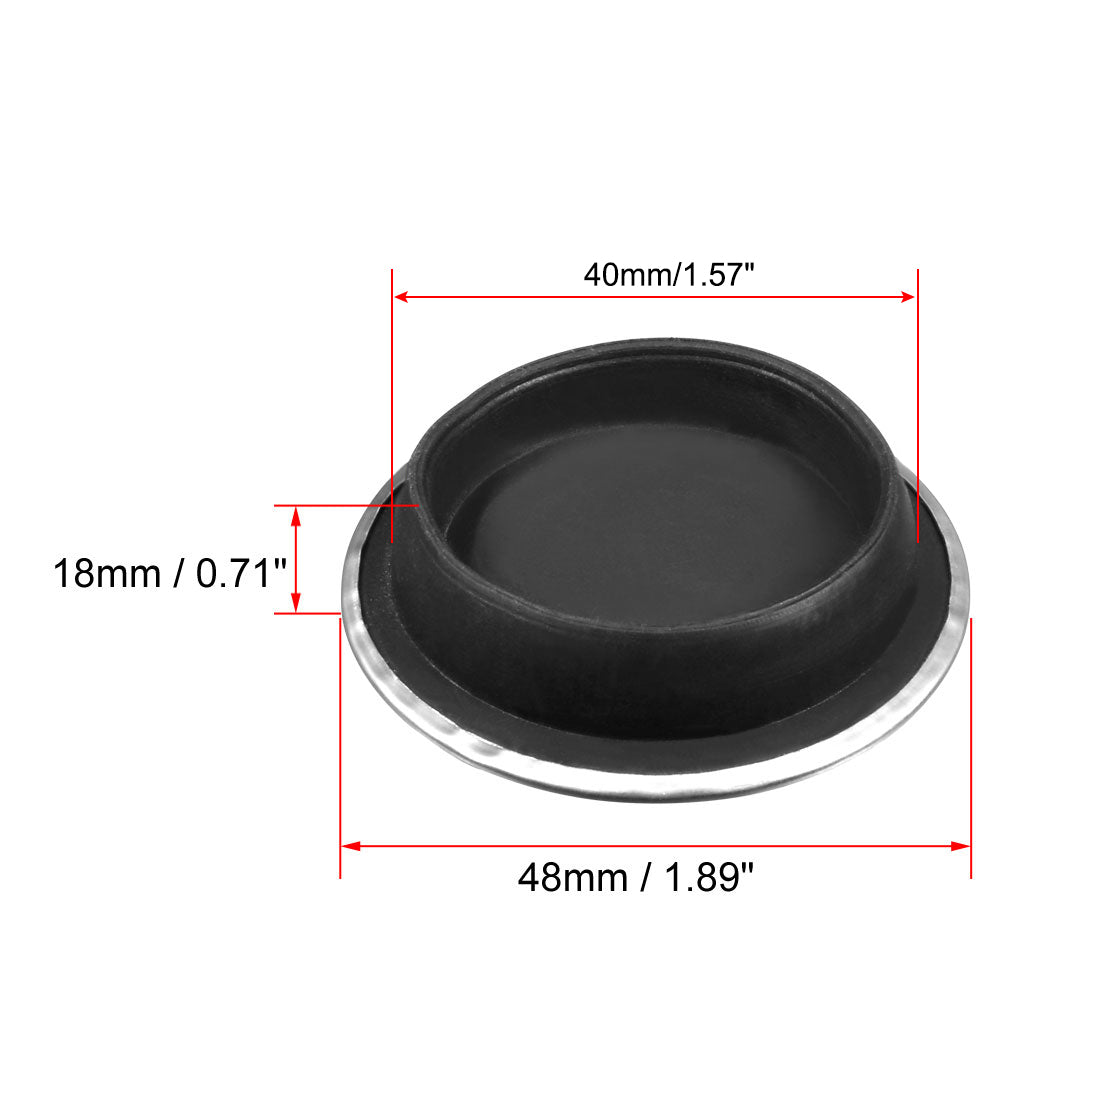 uxcell Uxcell Rubber Sink Plug Drain Stopper Fit 40mm with Ring for Kitchen Sink